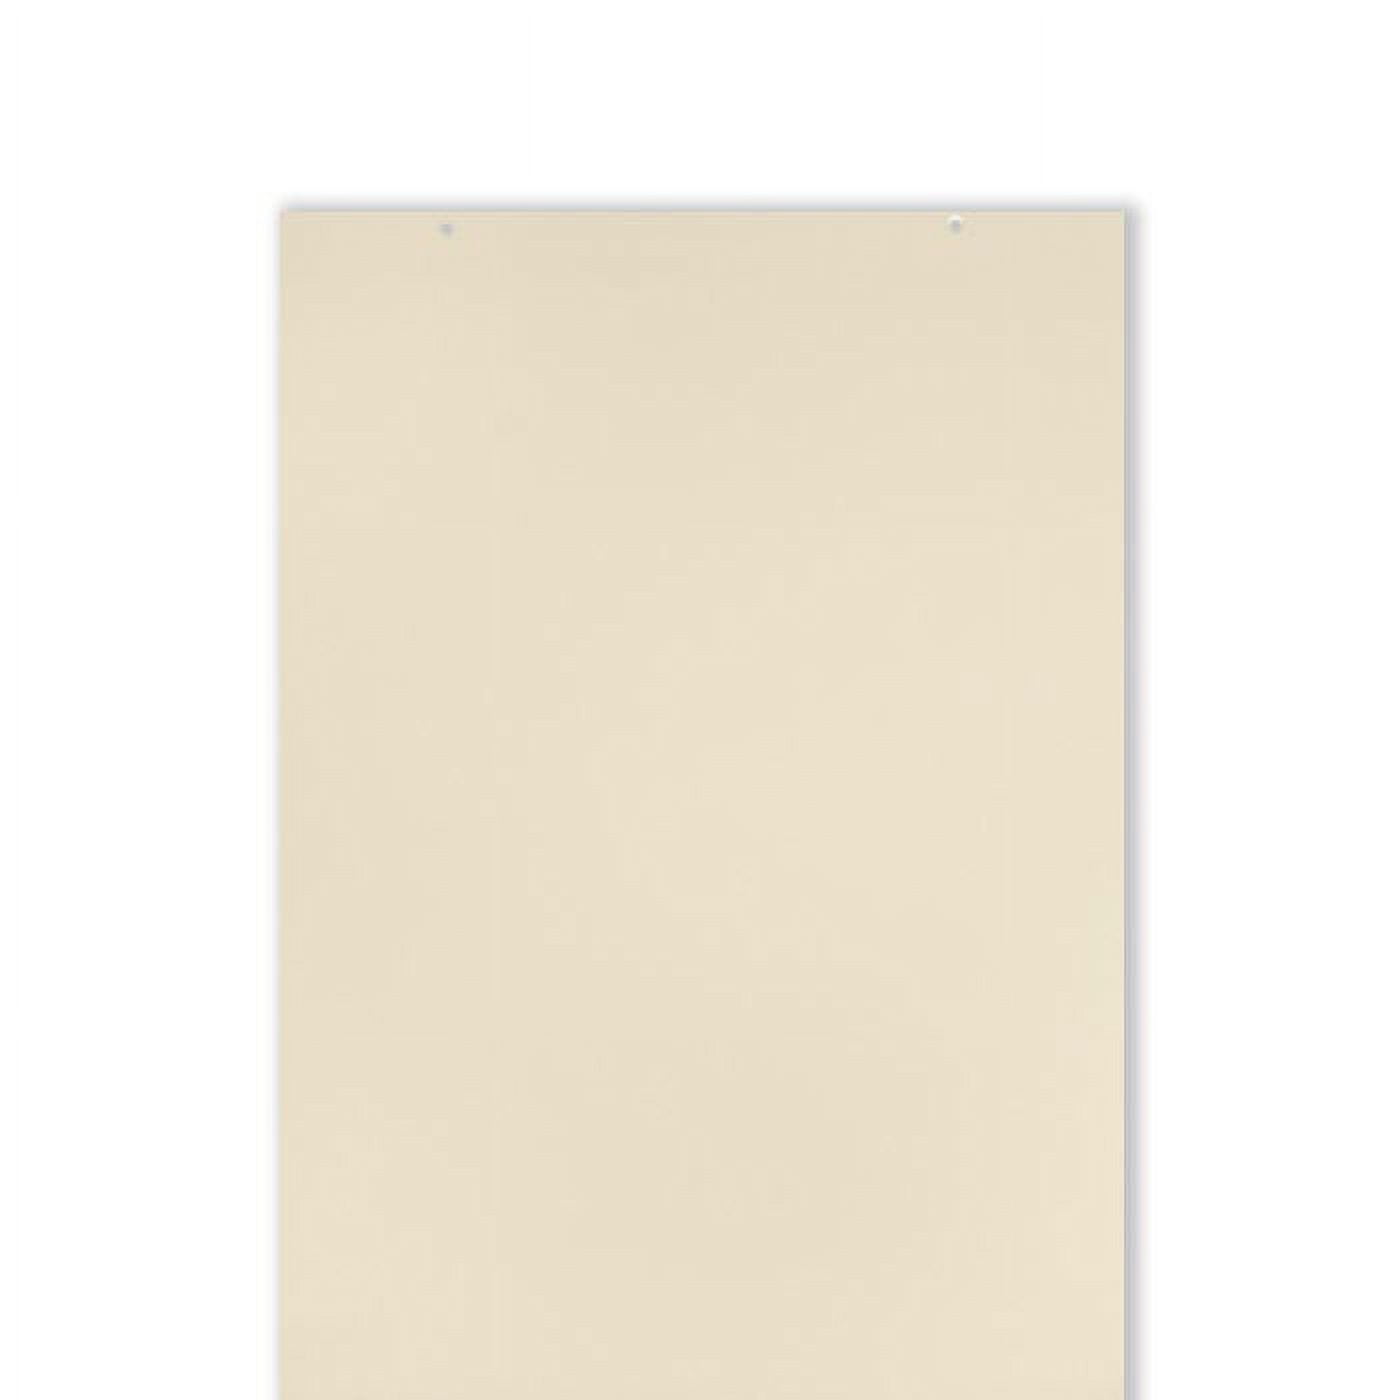 Manila Paper - 24 x 36 in 125 lb Tag Smooth